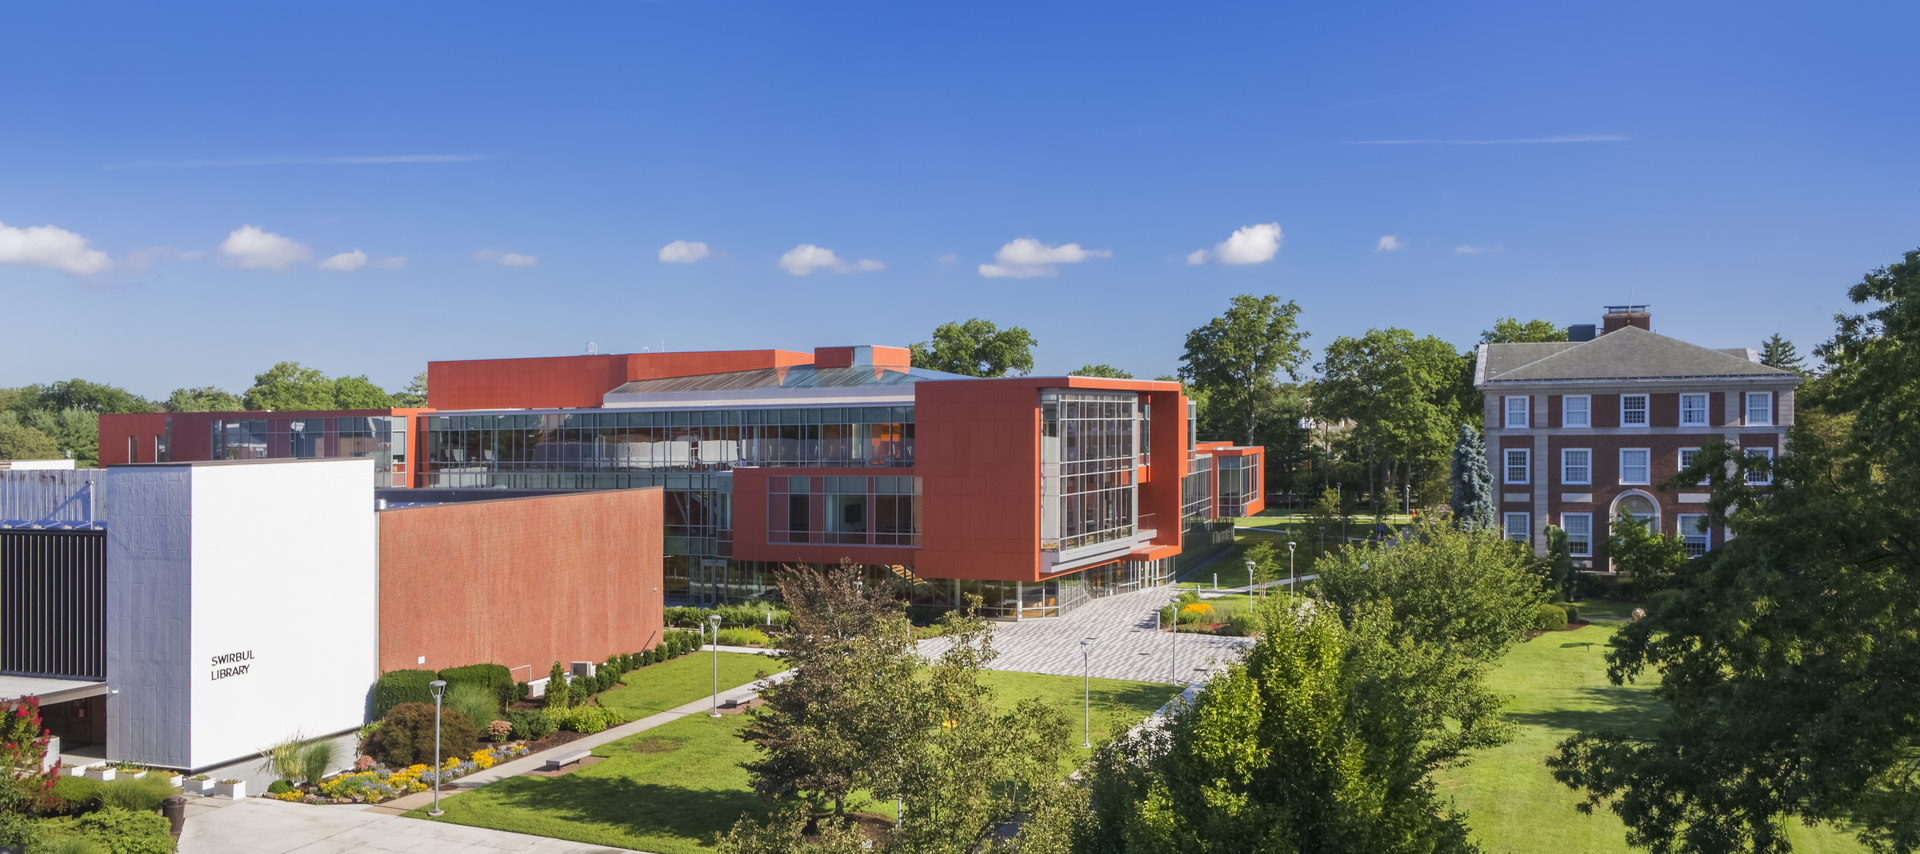 10 Easiest Courses at Adelphi University